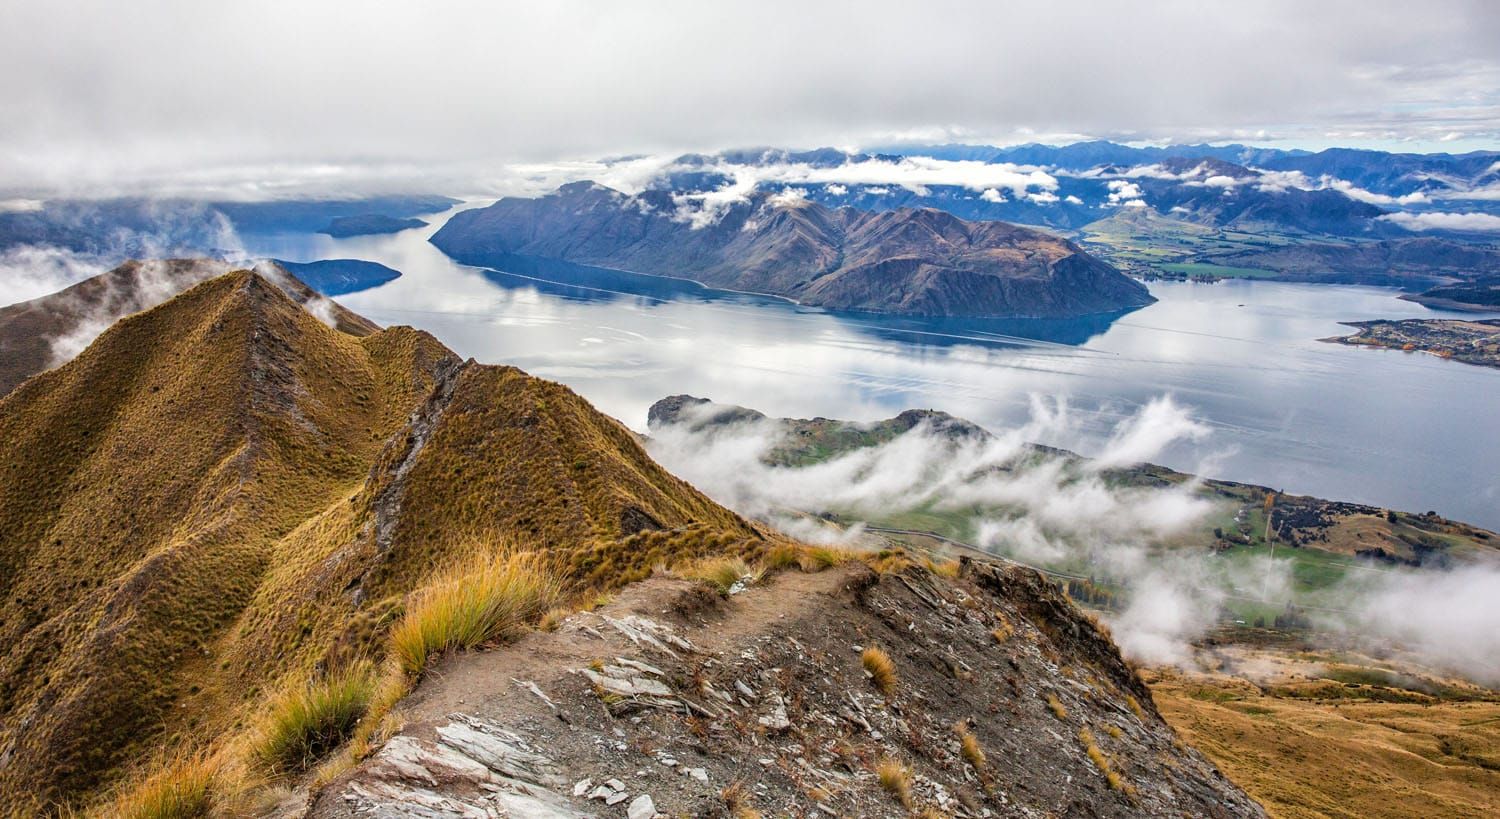 Roys Peak Viewpoint | Two Week South Island New Zealand Itinerary